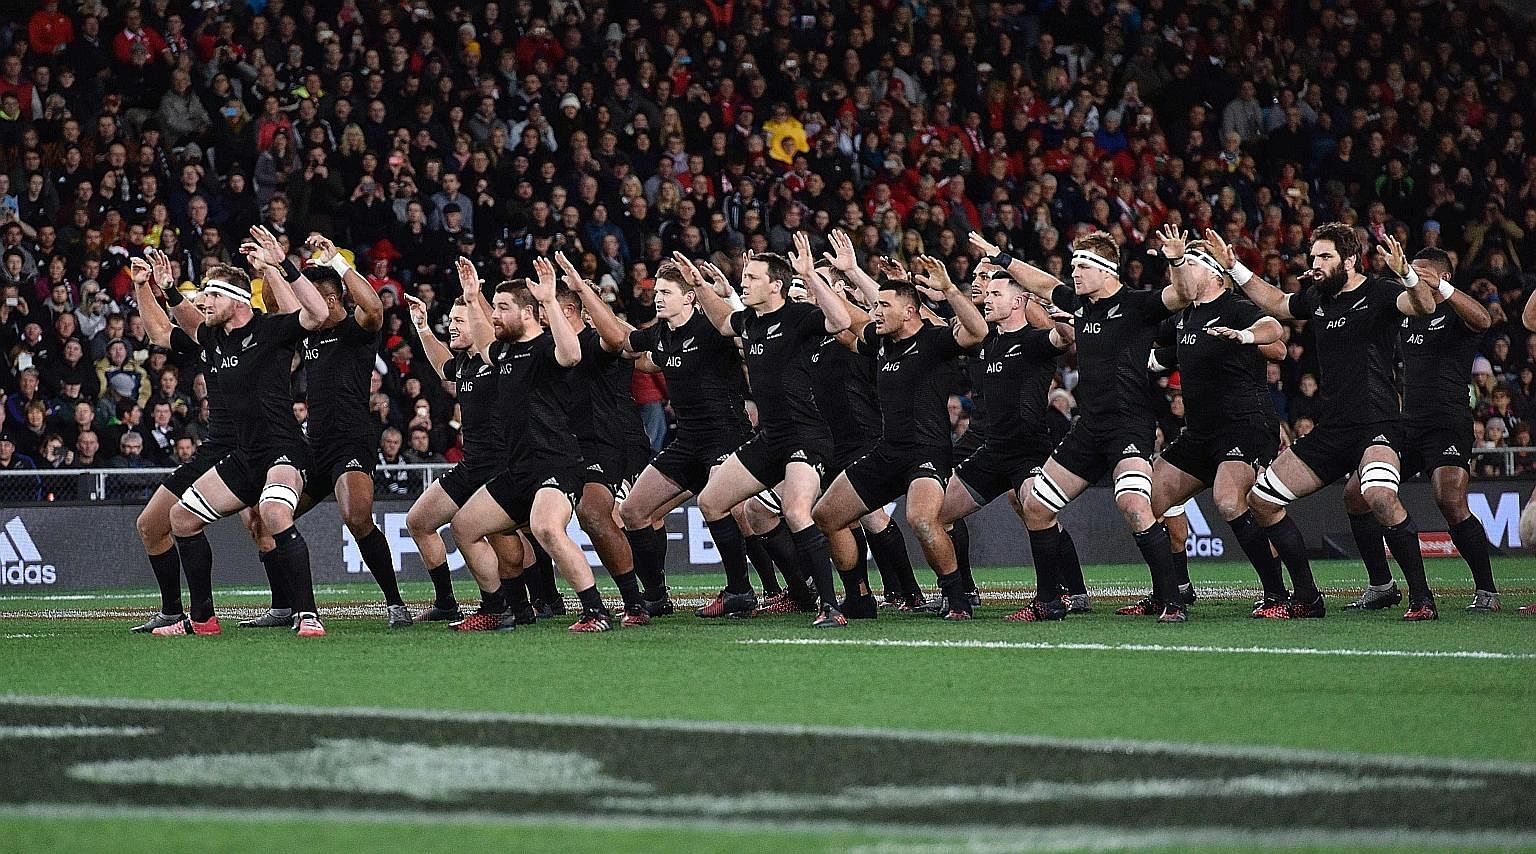 The New Zealand All Blacks practise the "sweep the shed" concept, where all players have to humbly sweep the locker room after each game. Humility forms the foundation of an All Black.